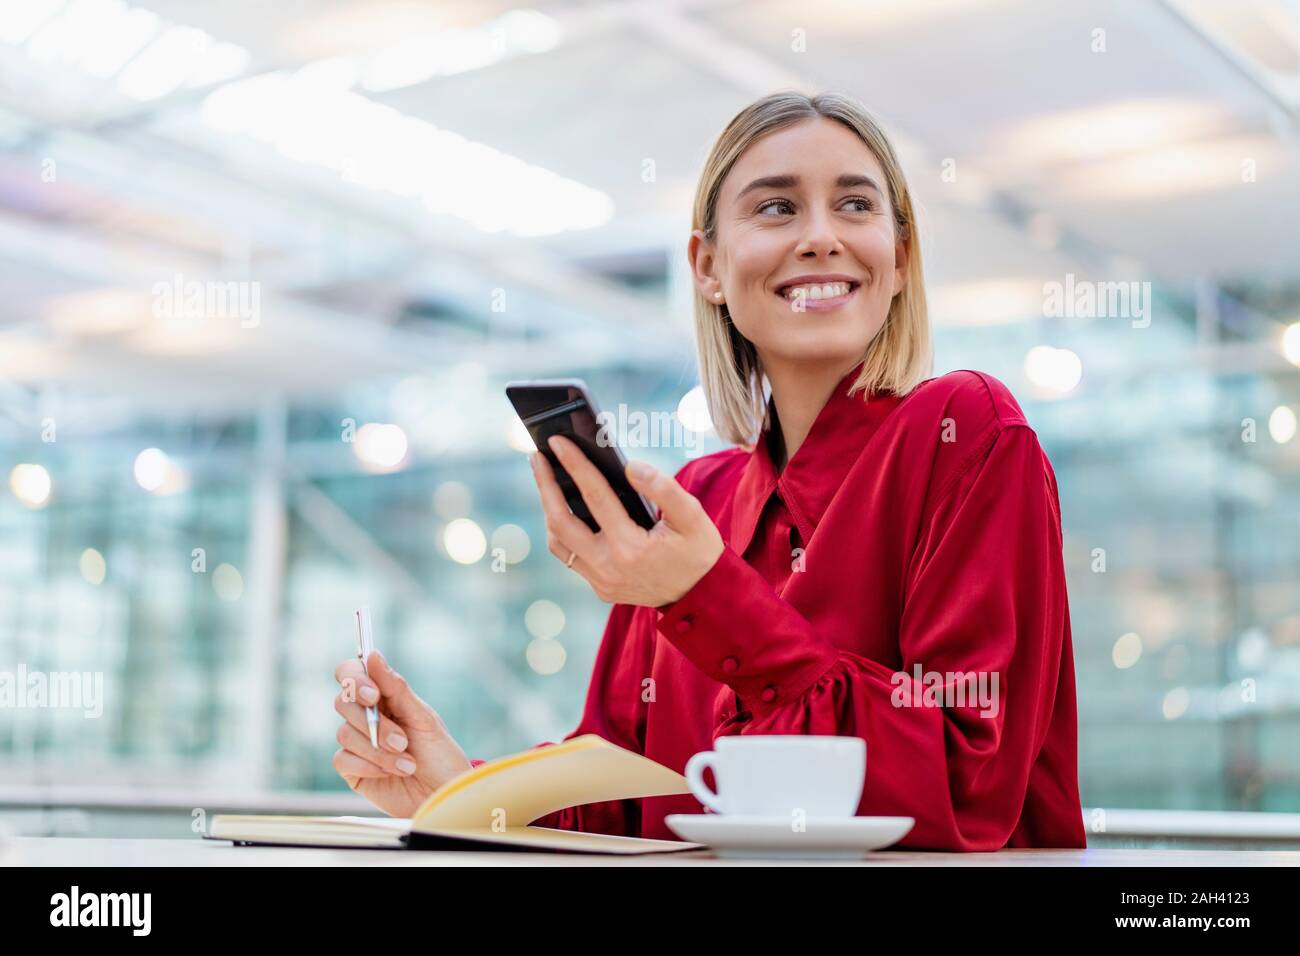 Young businesswoman with cell phone taking notes in a cafe Stock Photo